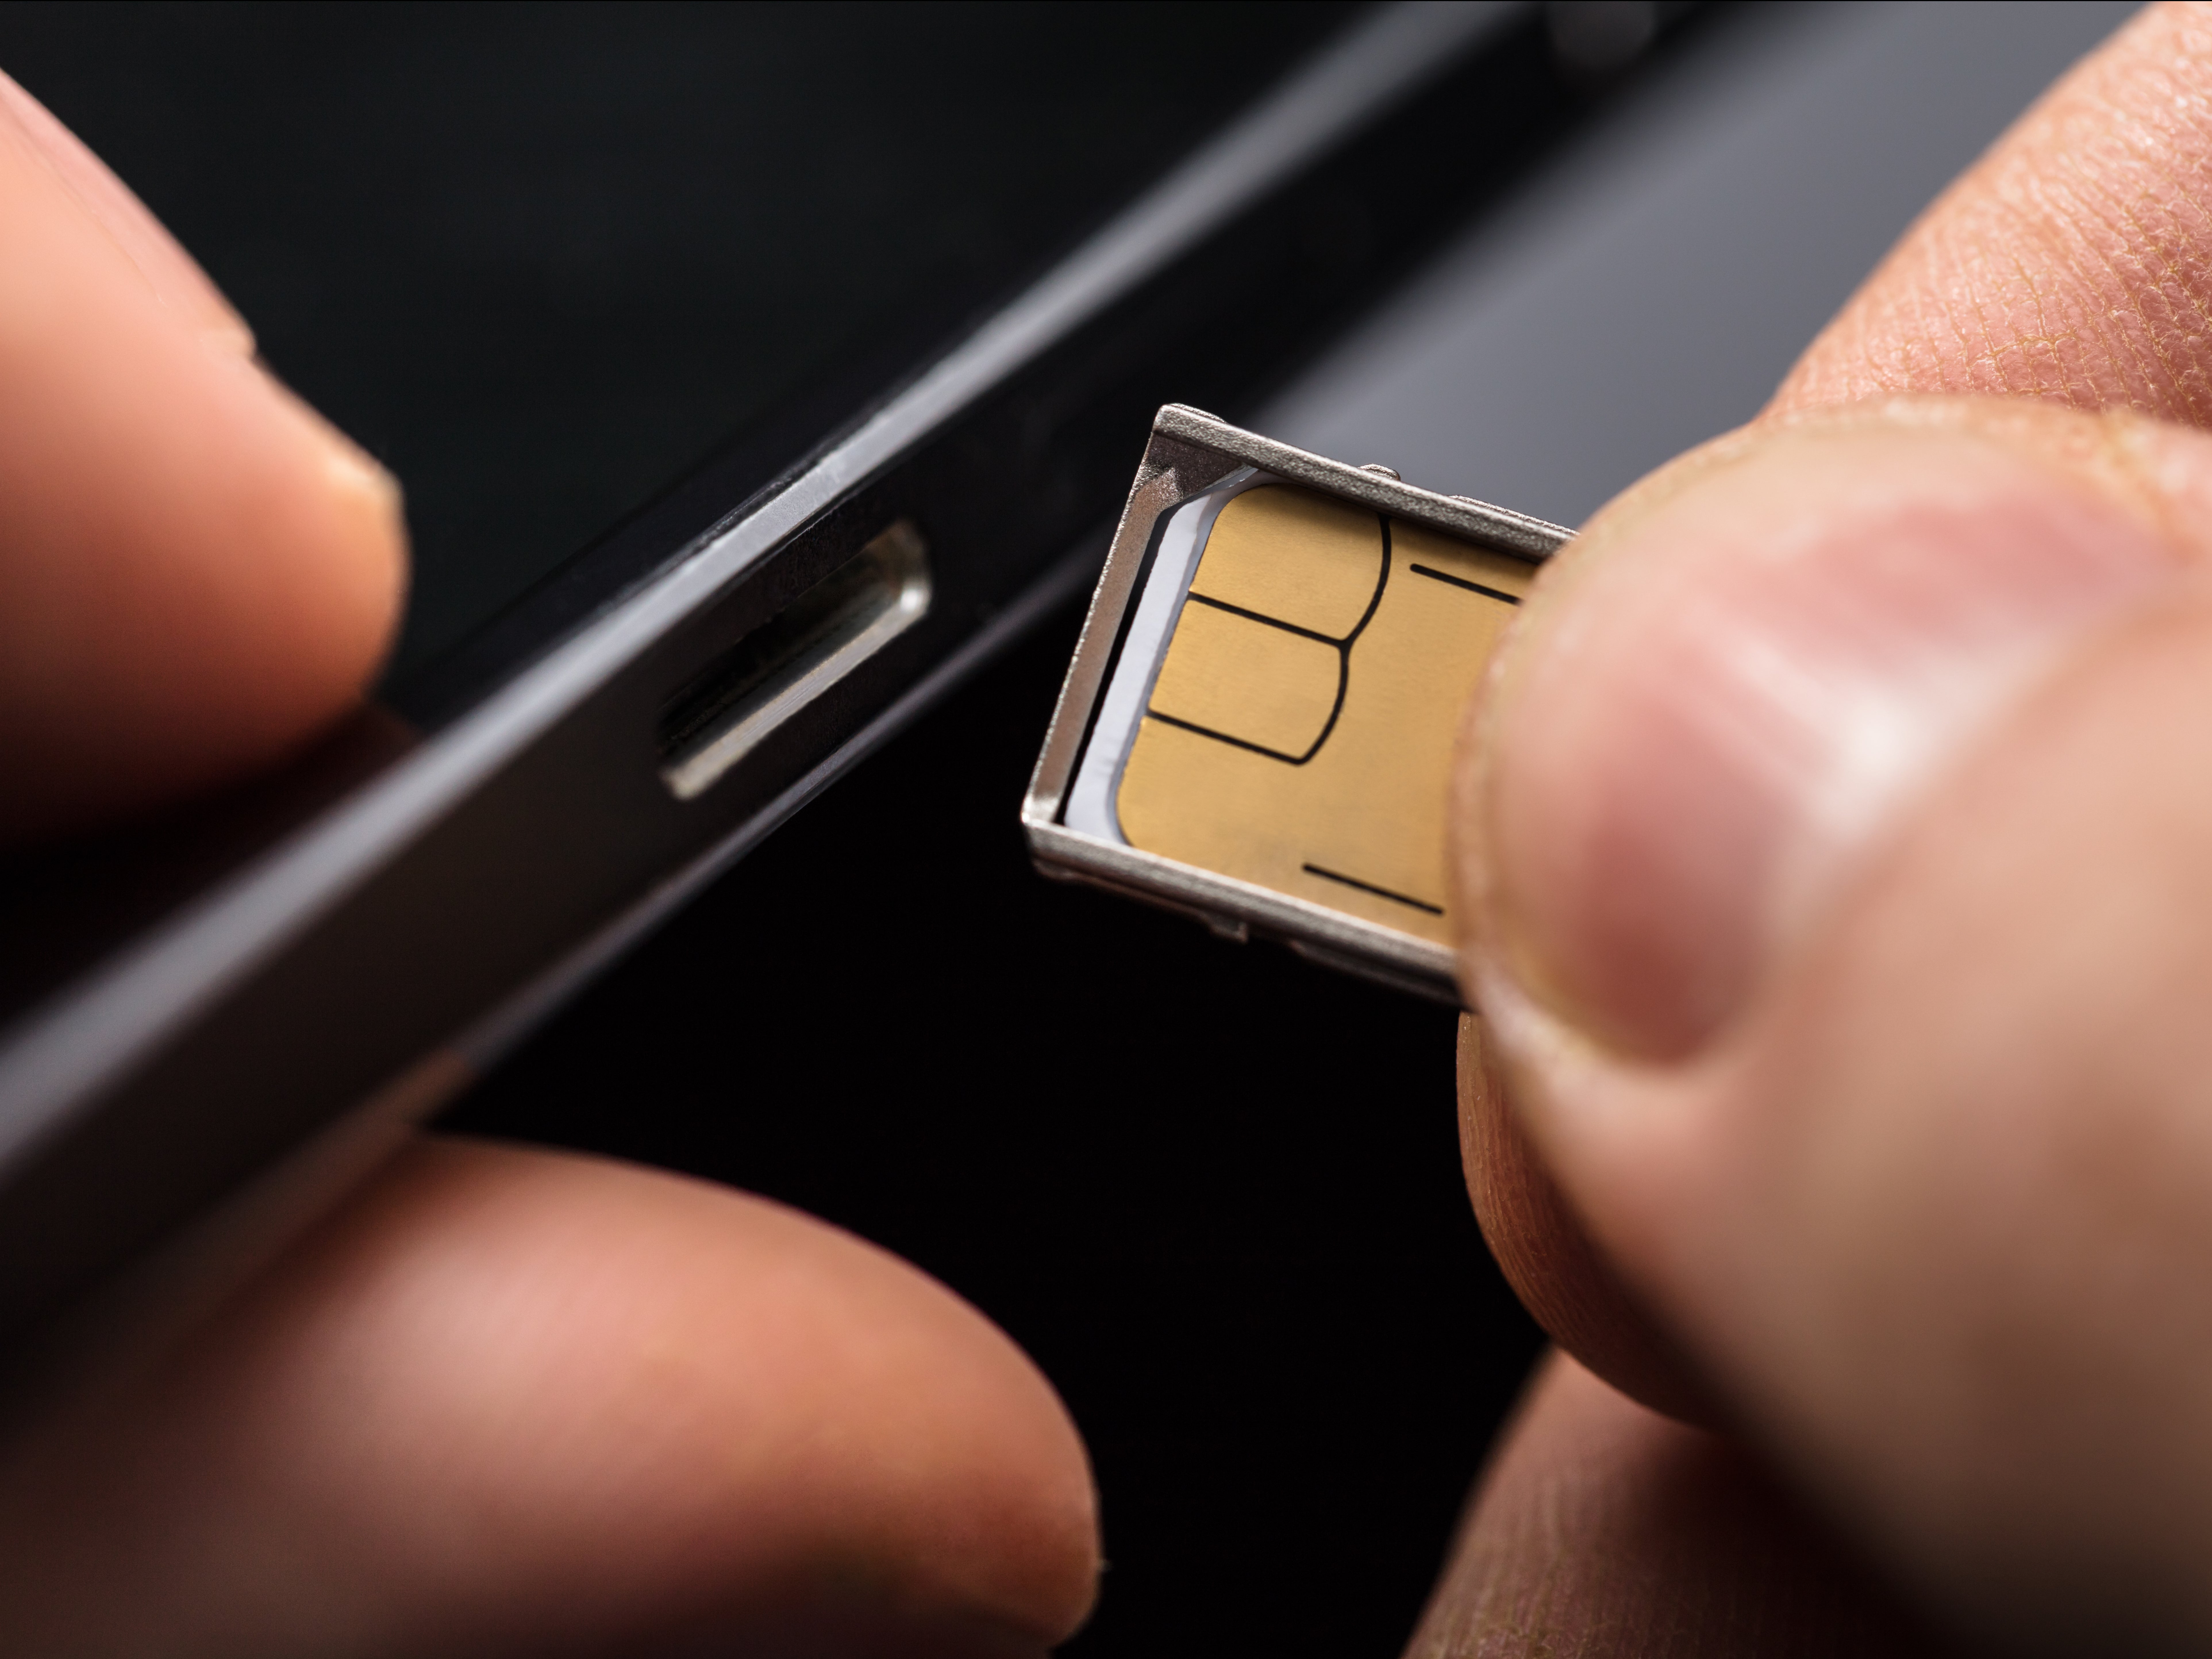 Eight men have been arrested in the UK over sim card-swapping attacks against US influencers, sports stars and musicians